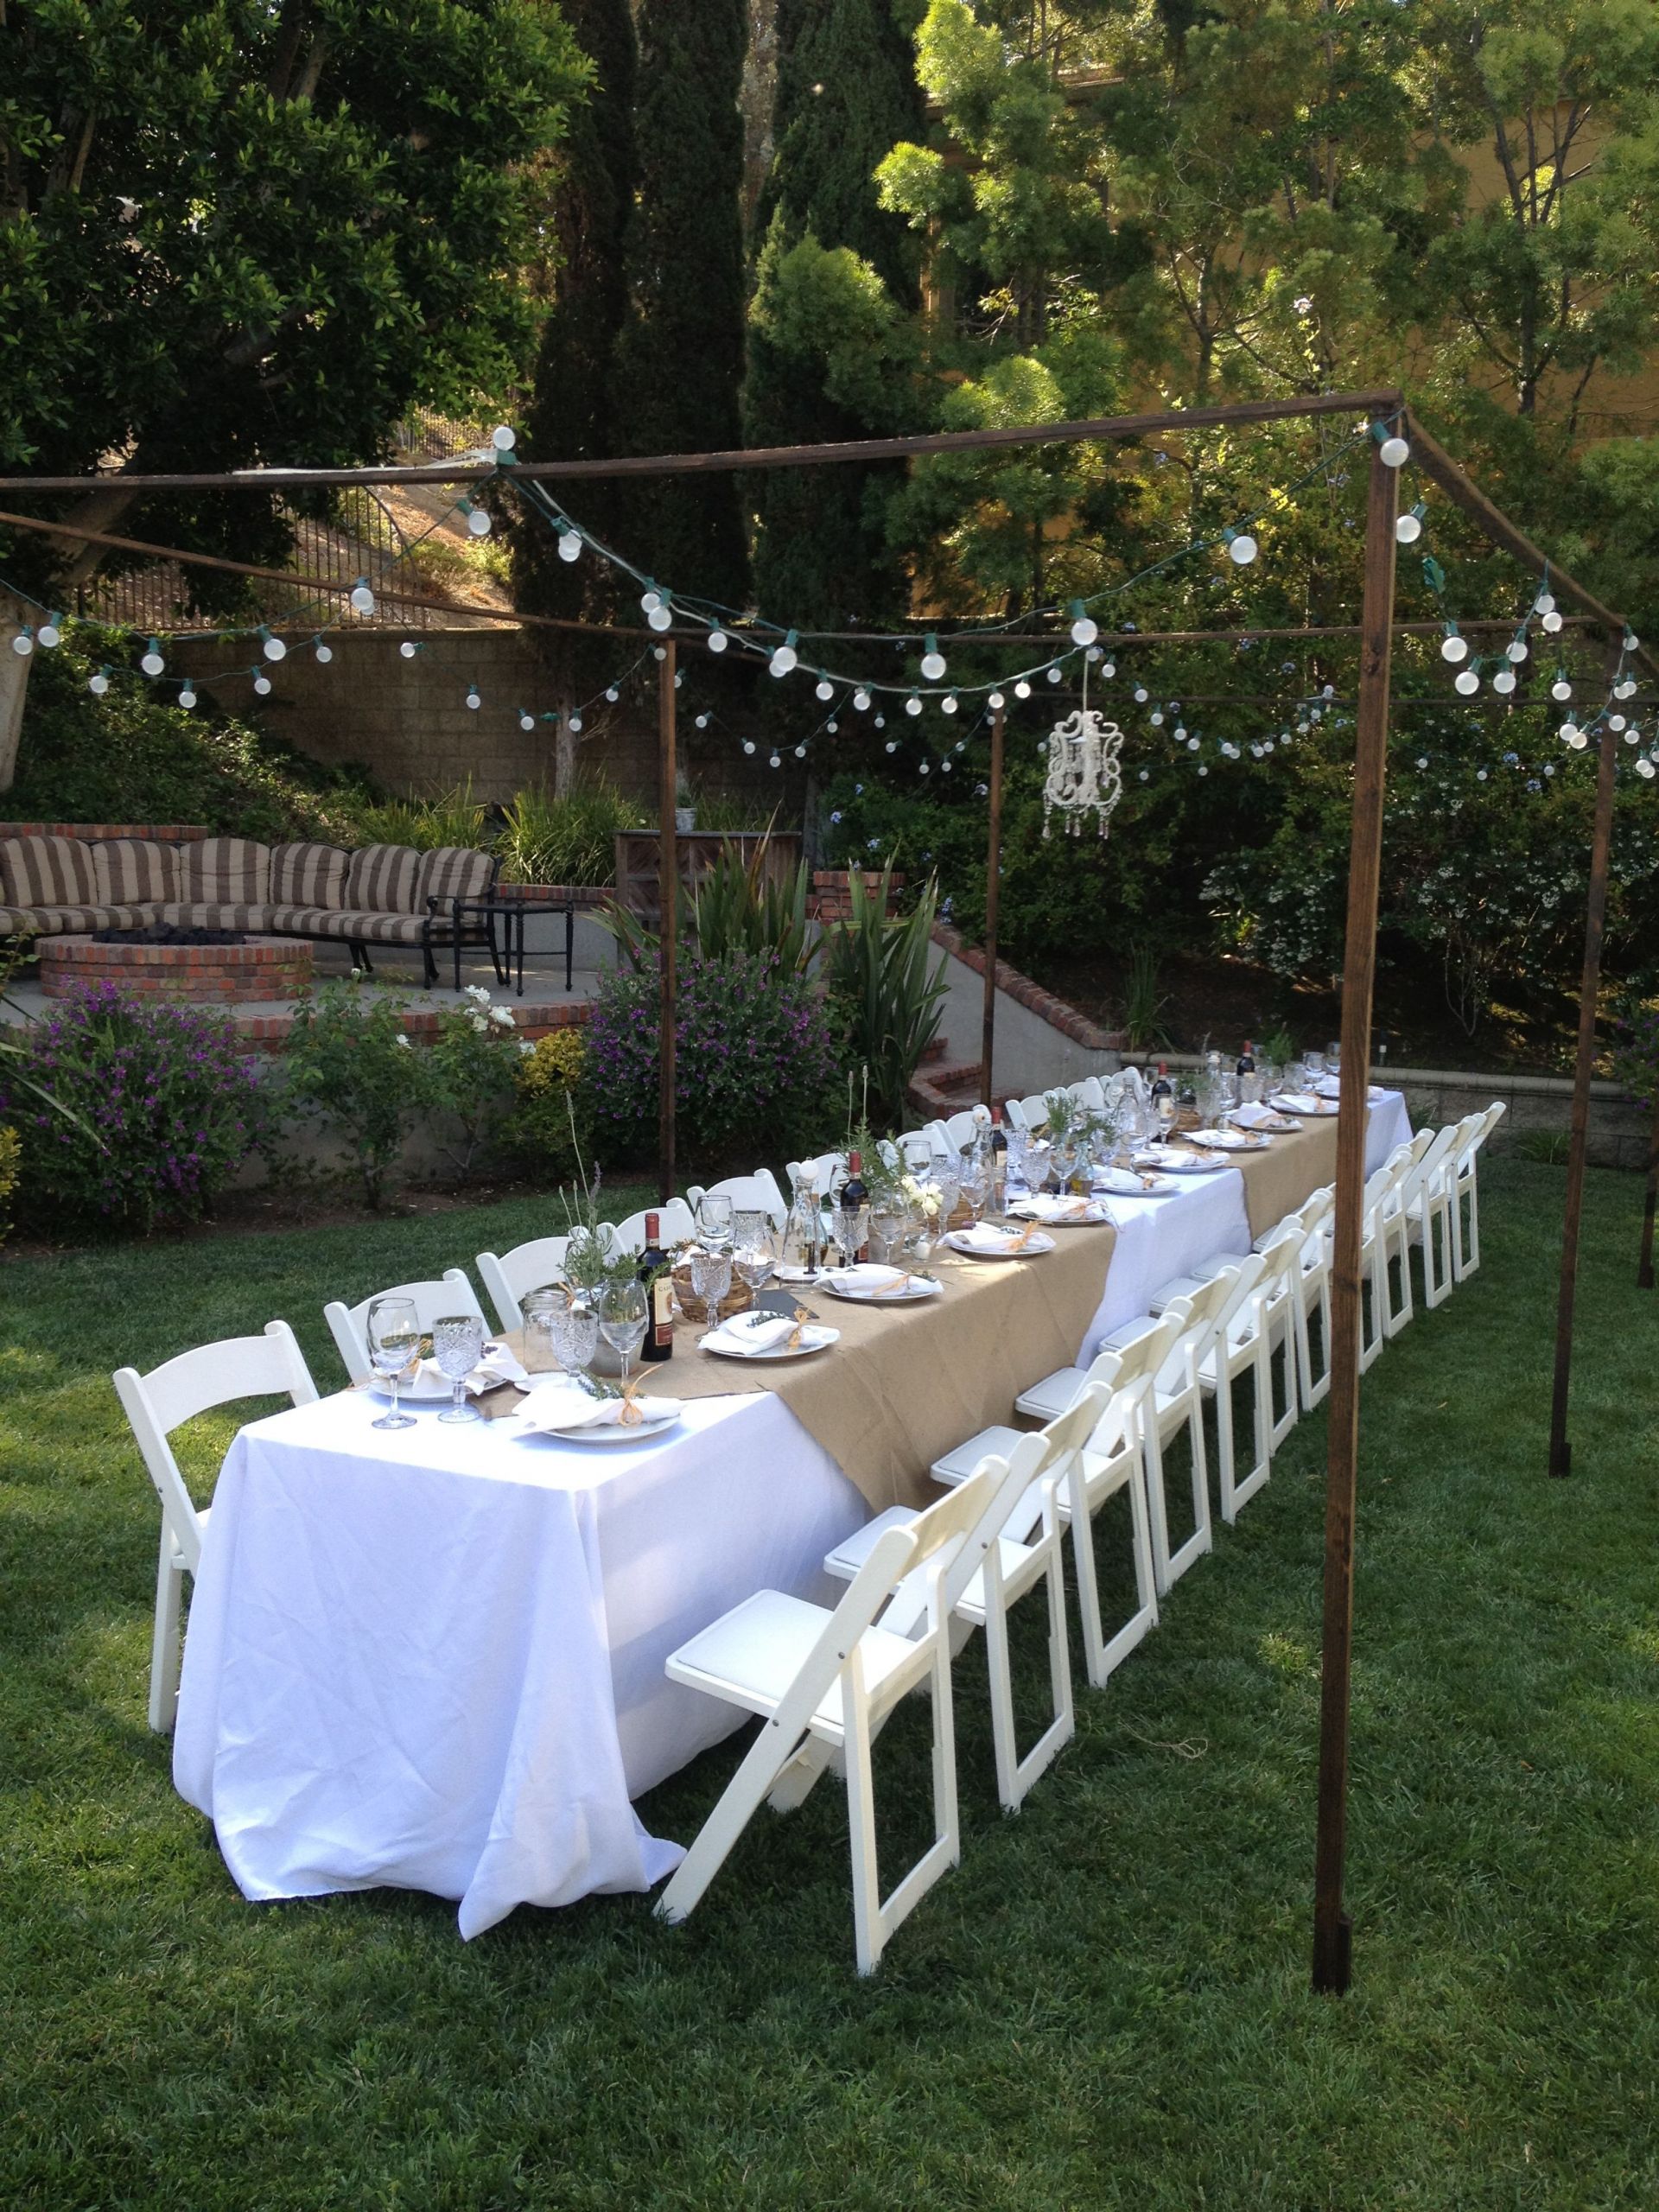 Backyard Dinner Party Decorating Ideas
 Outdoor Tuscan Dinner Party